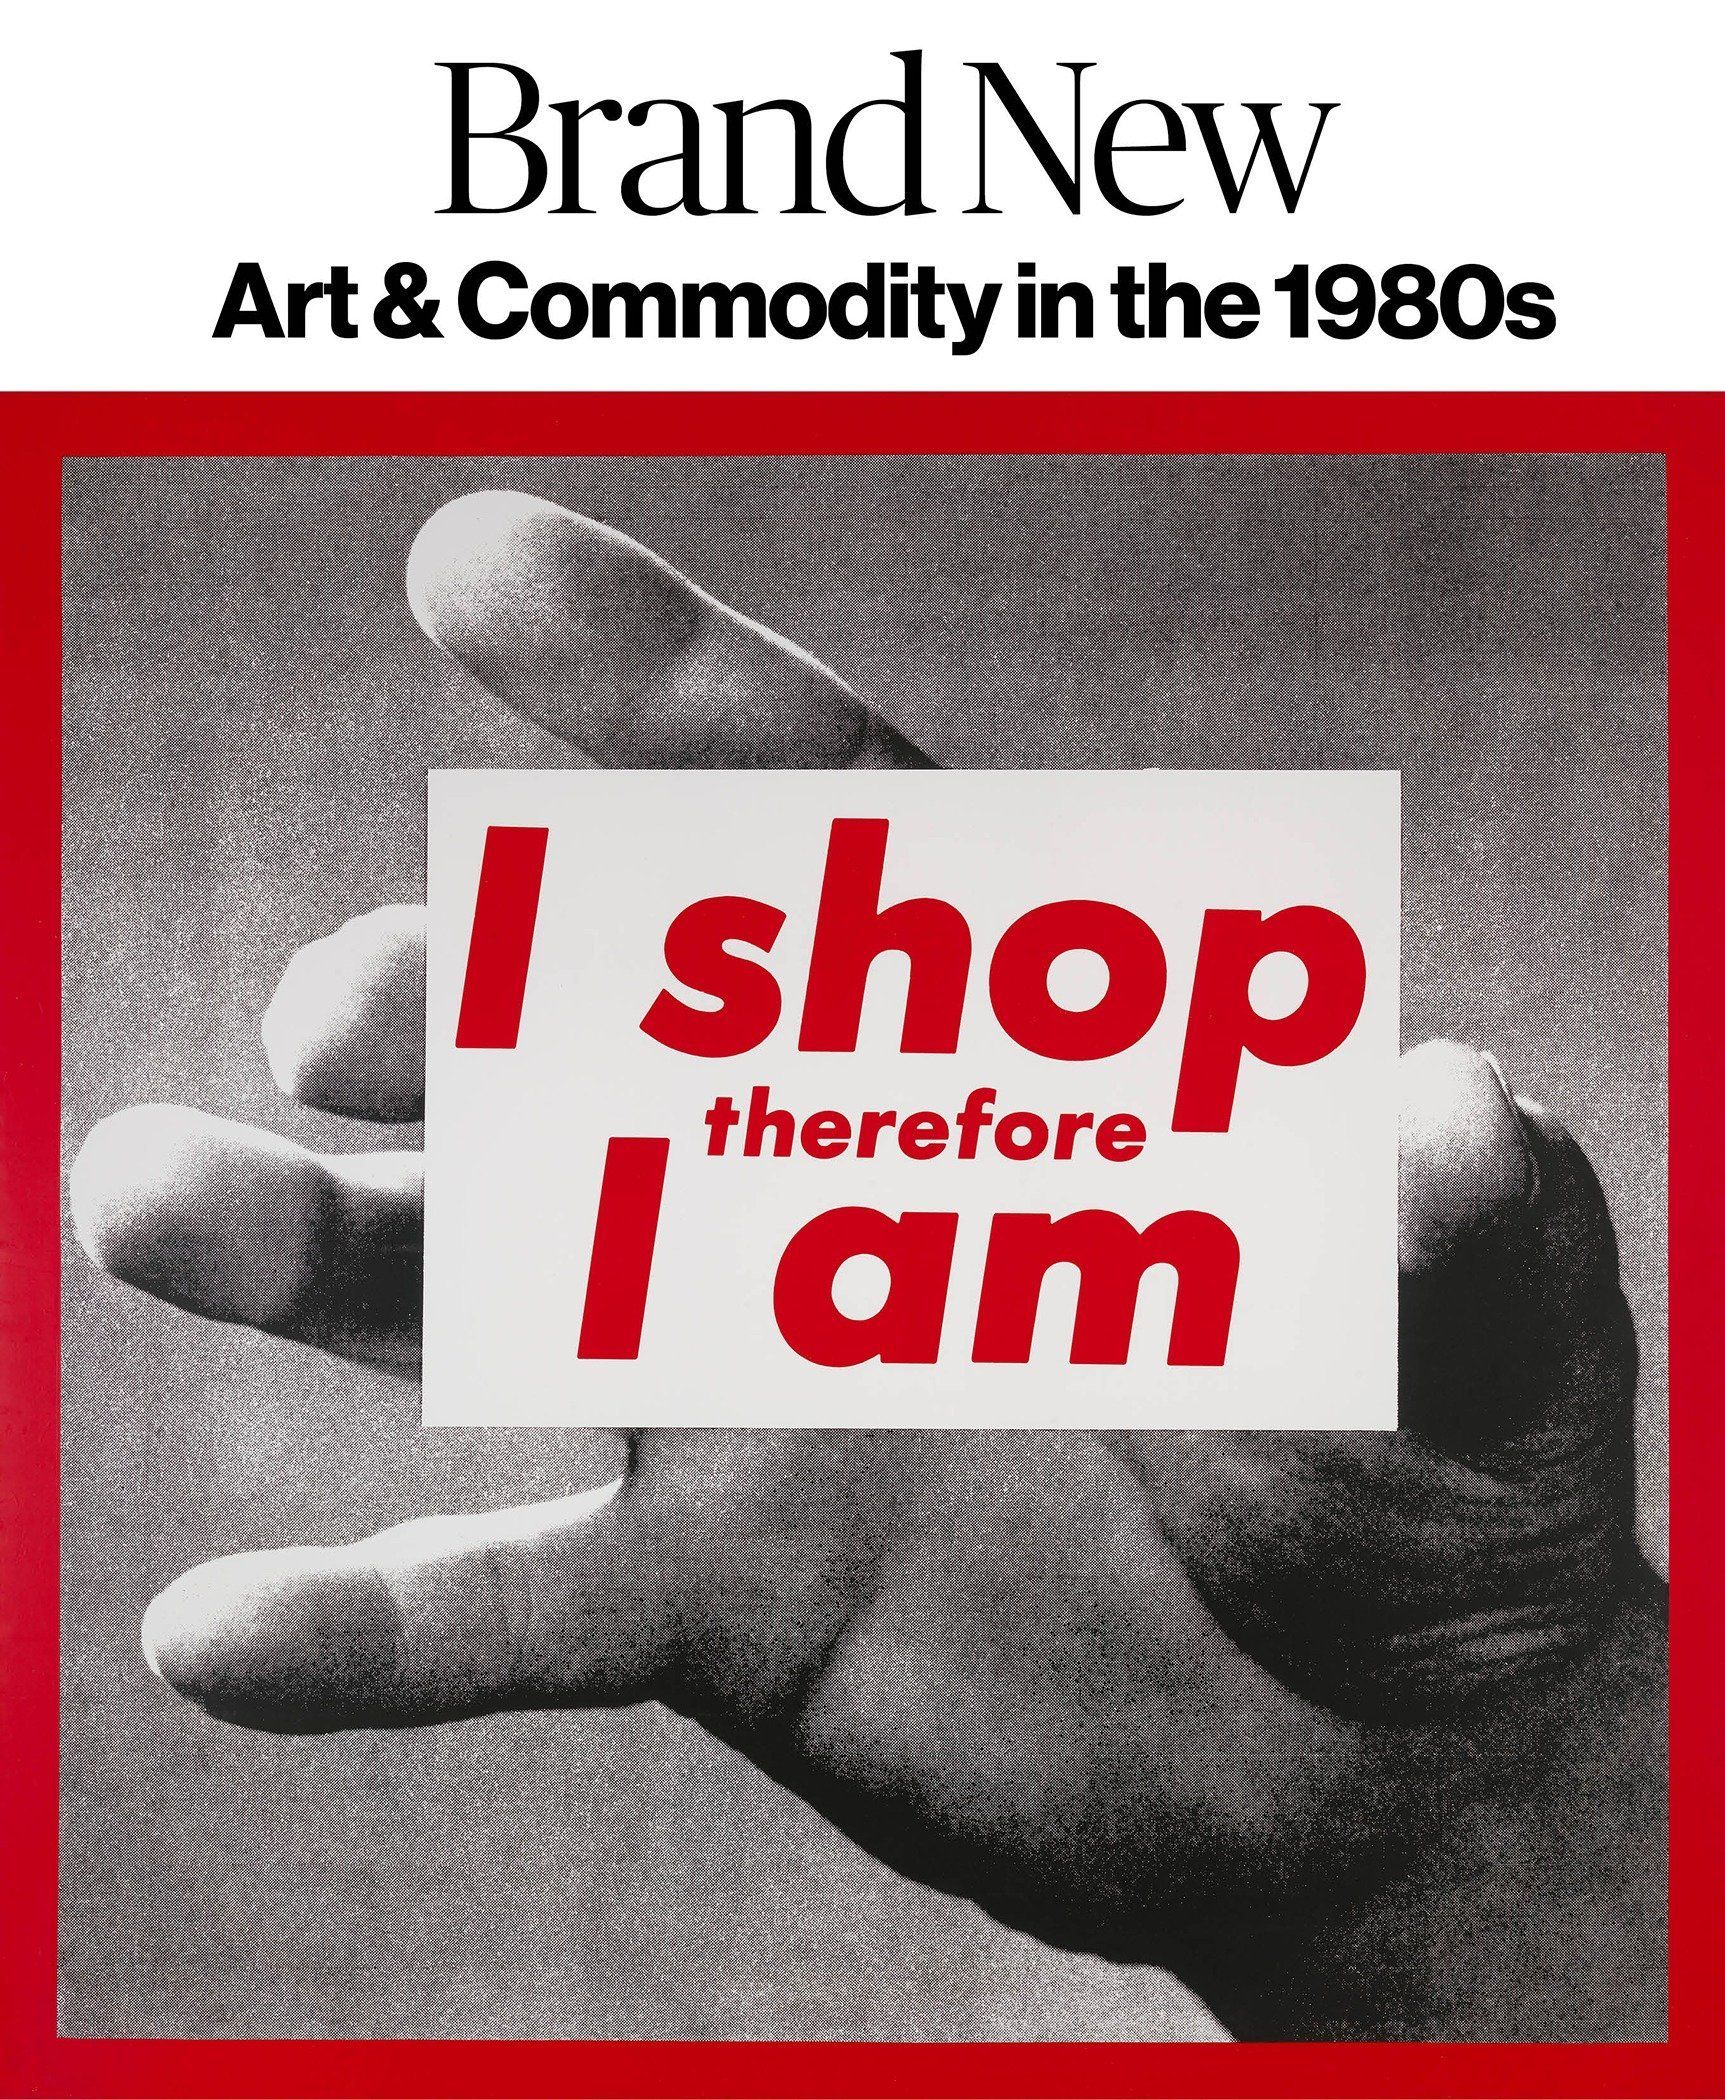 Brand New: Art and Commodity in the 1980s club 57 film performance and art in the east village 1978–1983